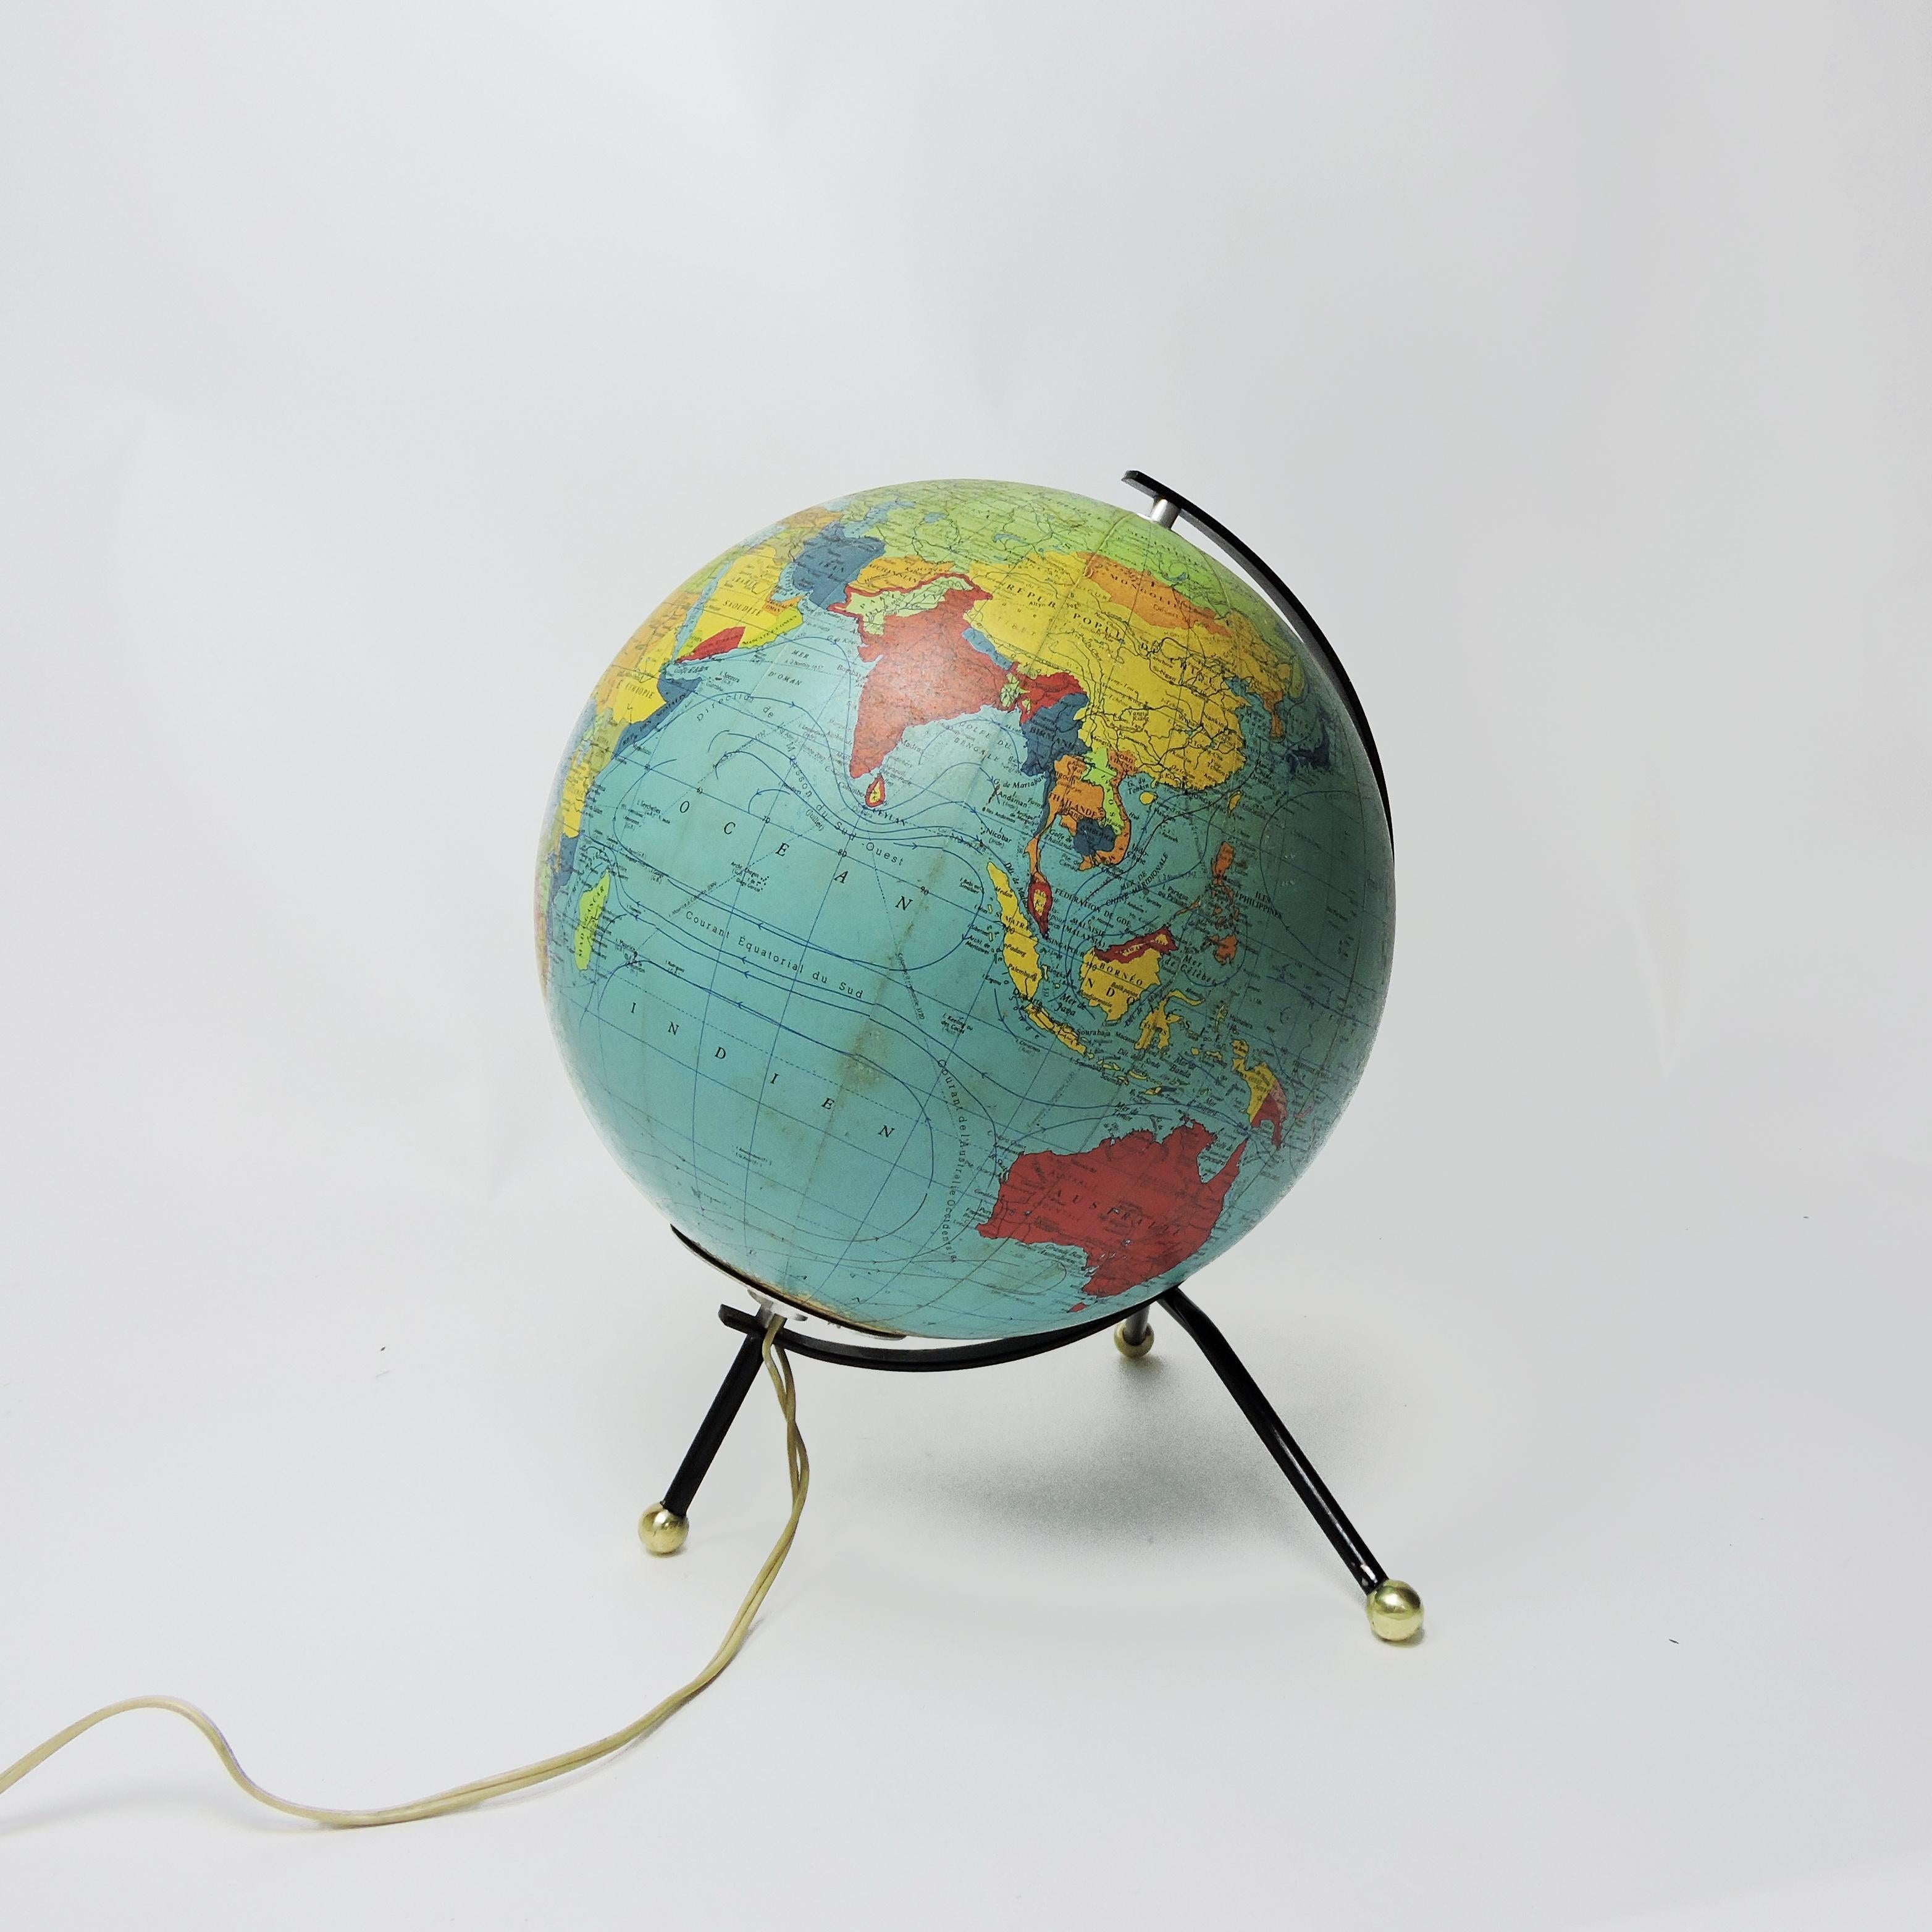 Vintage Tripod Glowing Earth Globe by Cartes Taride, 1966 For Sale 2